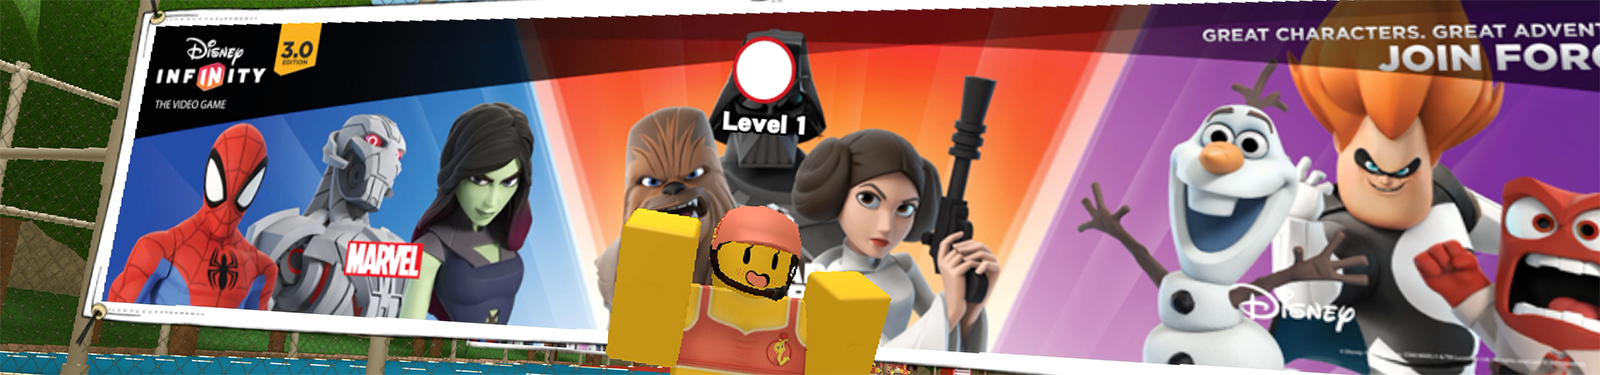 How To Get An Advertiser To Sponsor Your Game And Earn Robux - 